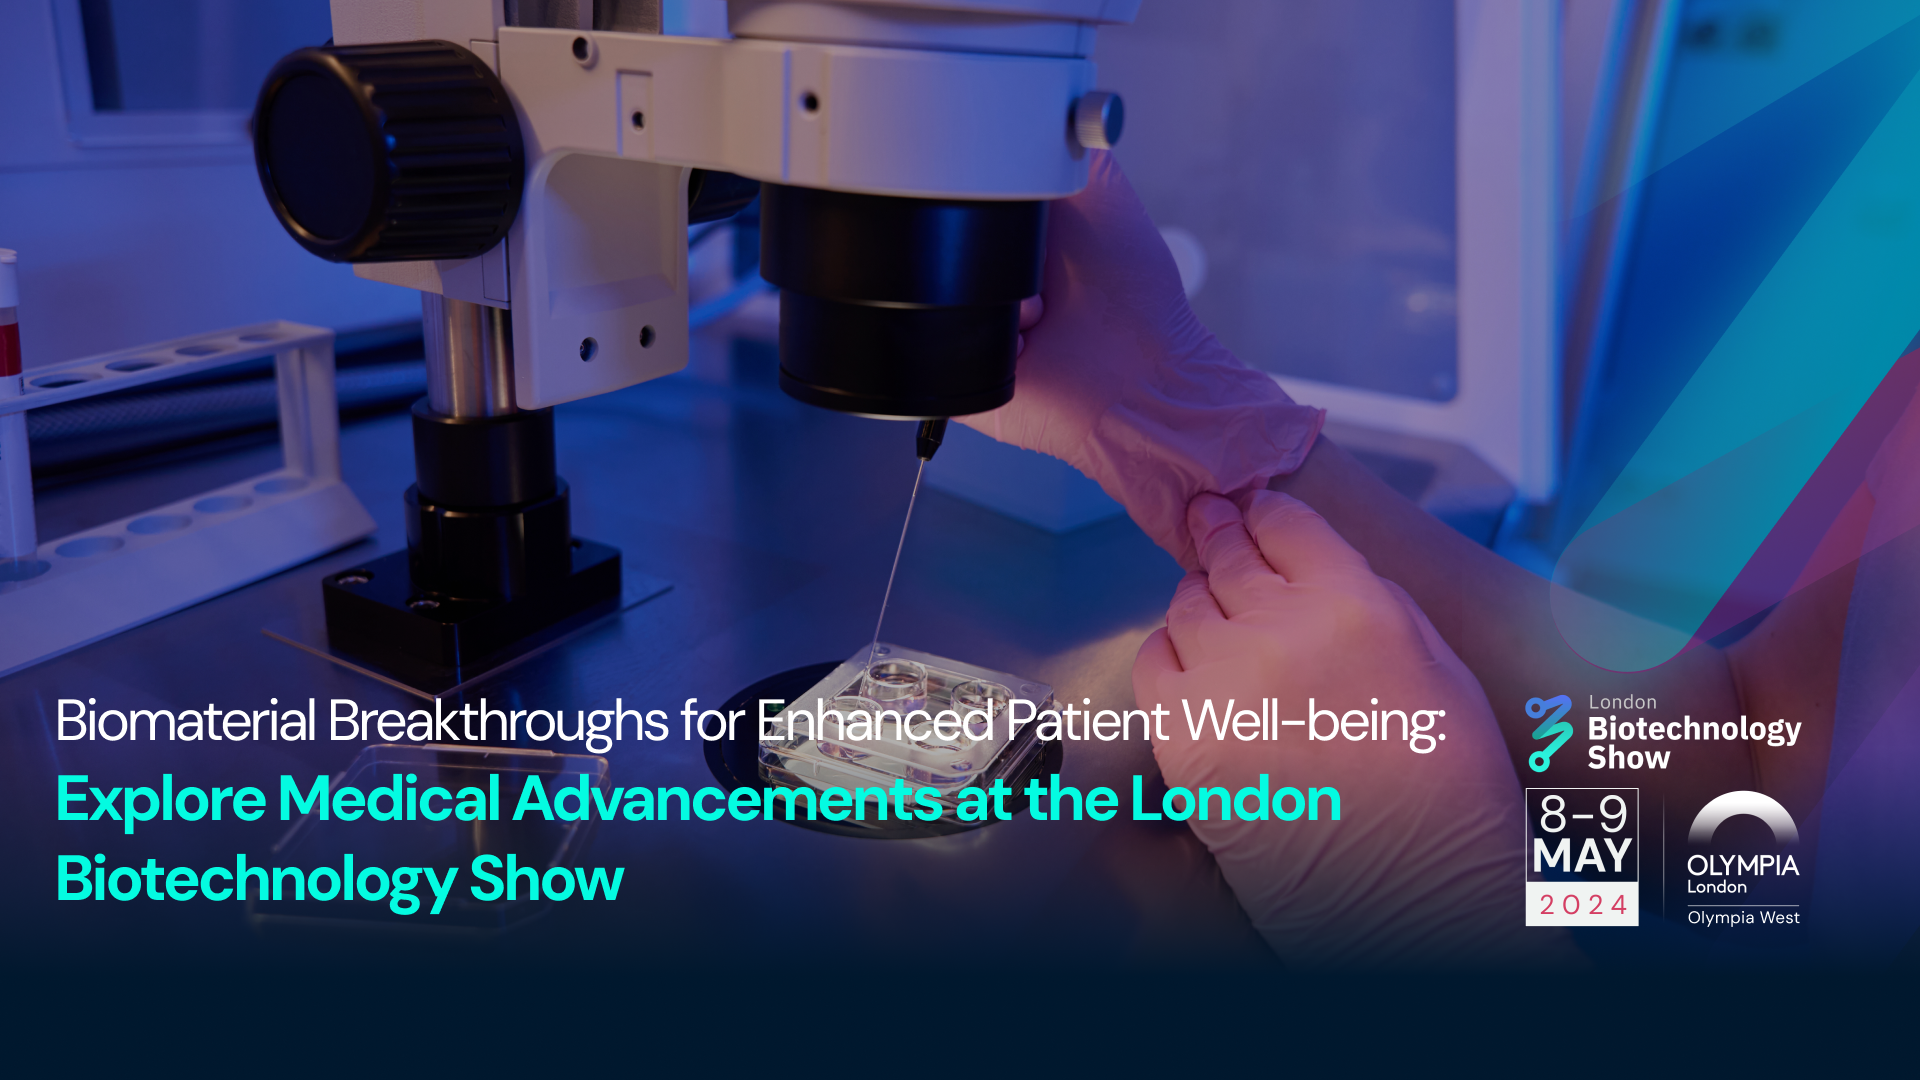 Biomaterial Breakthroughs for Enhanced Patient Well-being: Explore Medical Advancements at the London Biotechnology Show